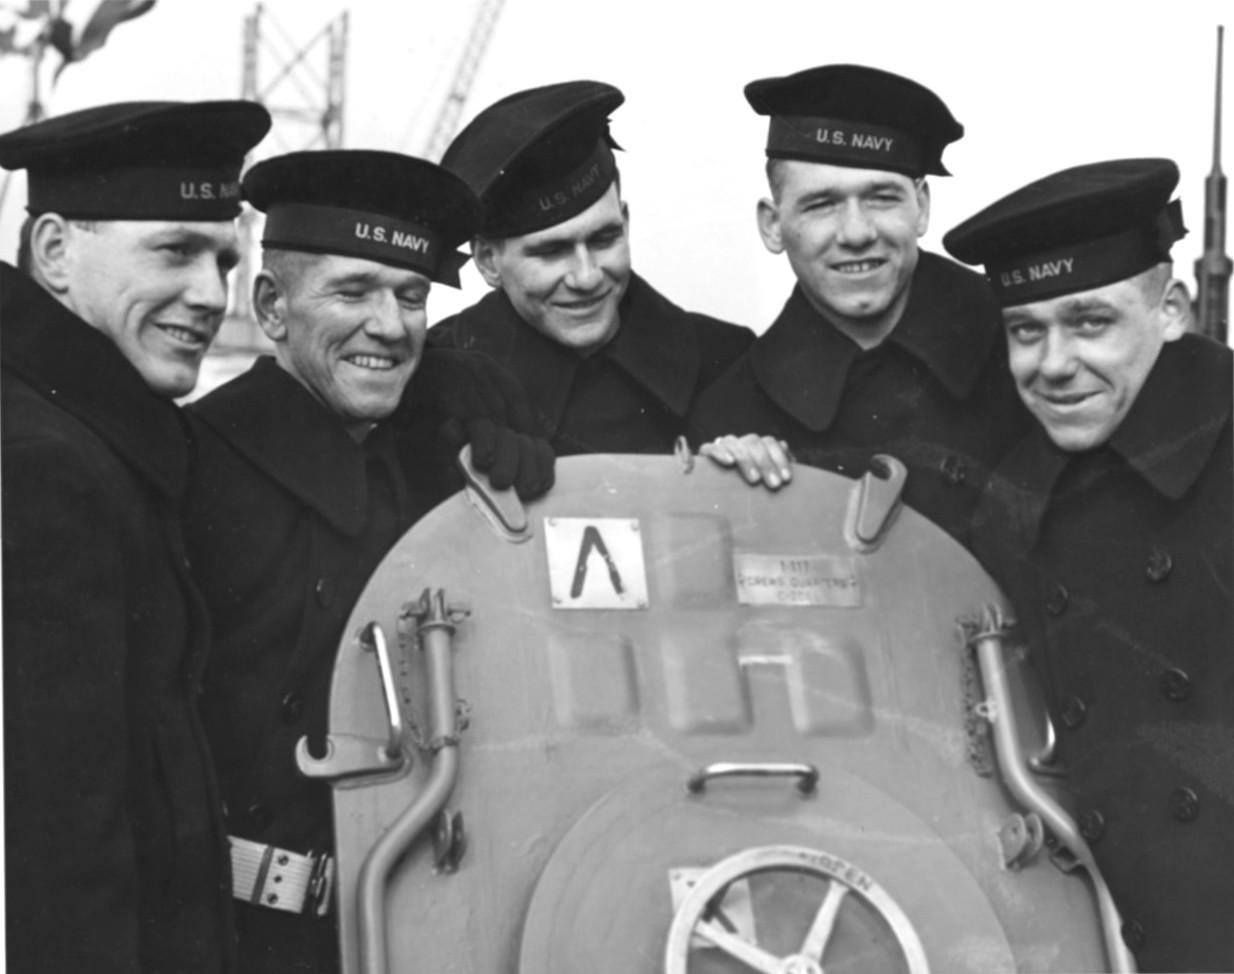 The five Sullivan brothers aboard USS Juneau upon her commissioning at New York Navy Yard, 14 Feb 1942. Left to Right they are Joseph, Francis, Albert, Madison, and George. All five were later lost with the ship.